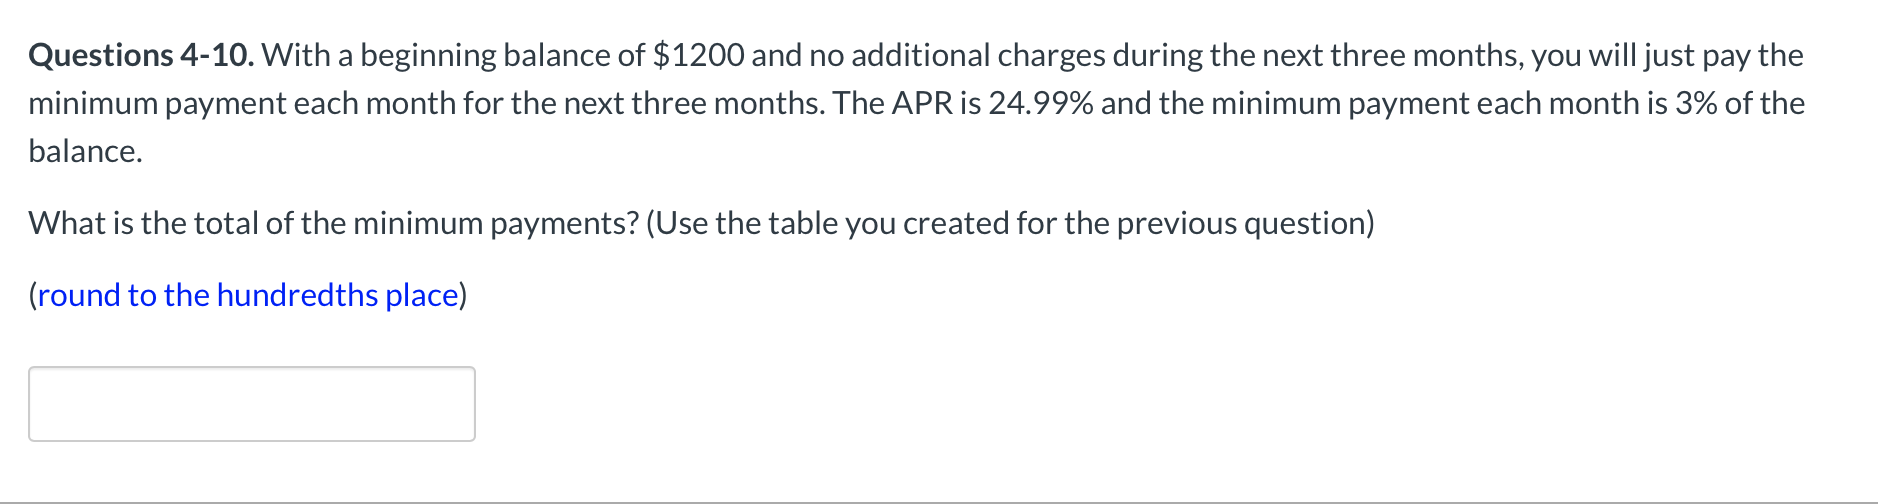 With a beginning balance of $1200 and no additional charges during the next three months, you will just pay the
ent each month for the next three months. The APR is 24.99% and the minimum payment each month is 3% of the
| of the minimum payments? (Use the table you created for the previous question)
